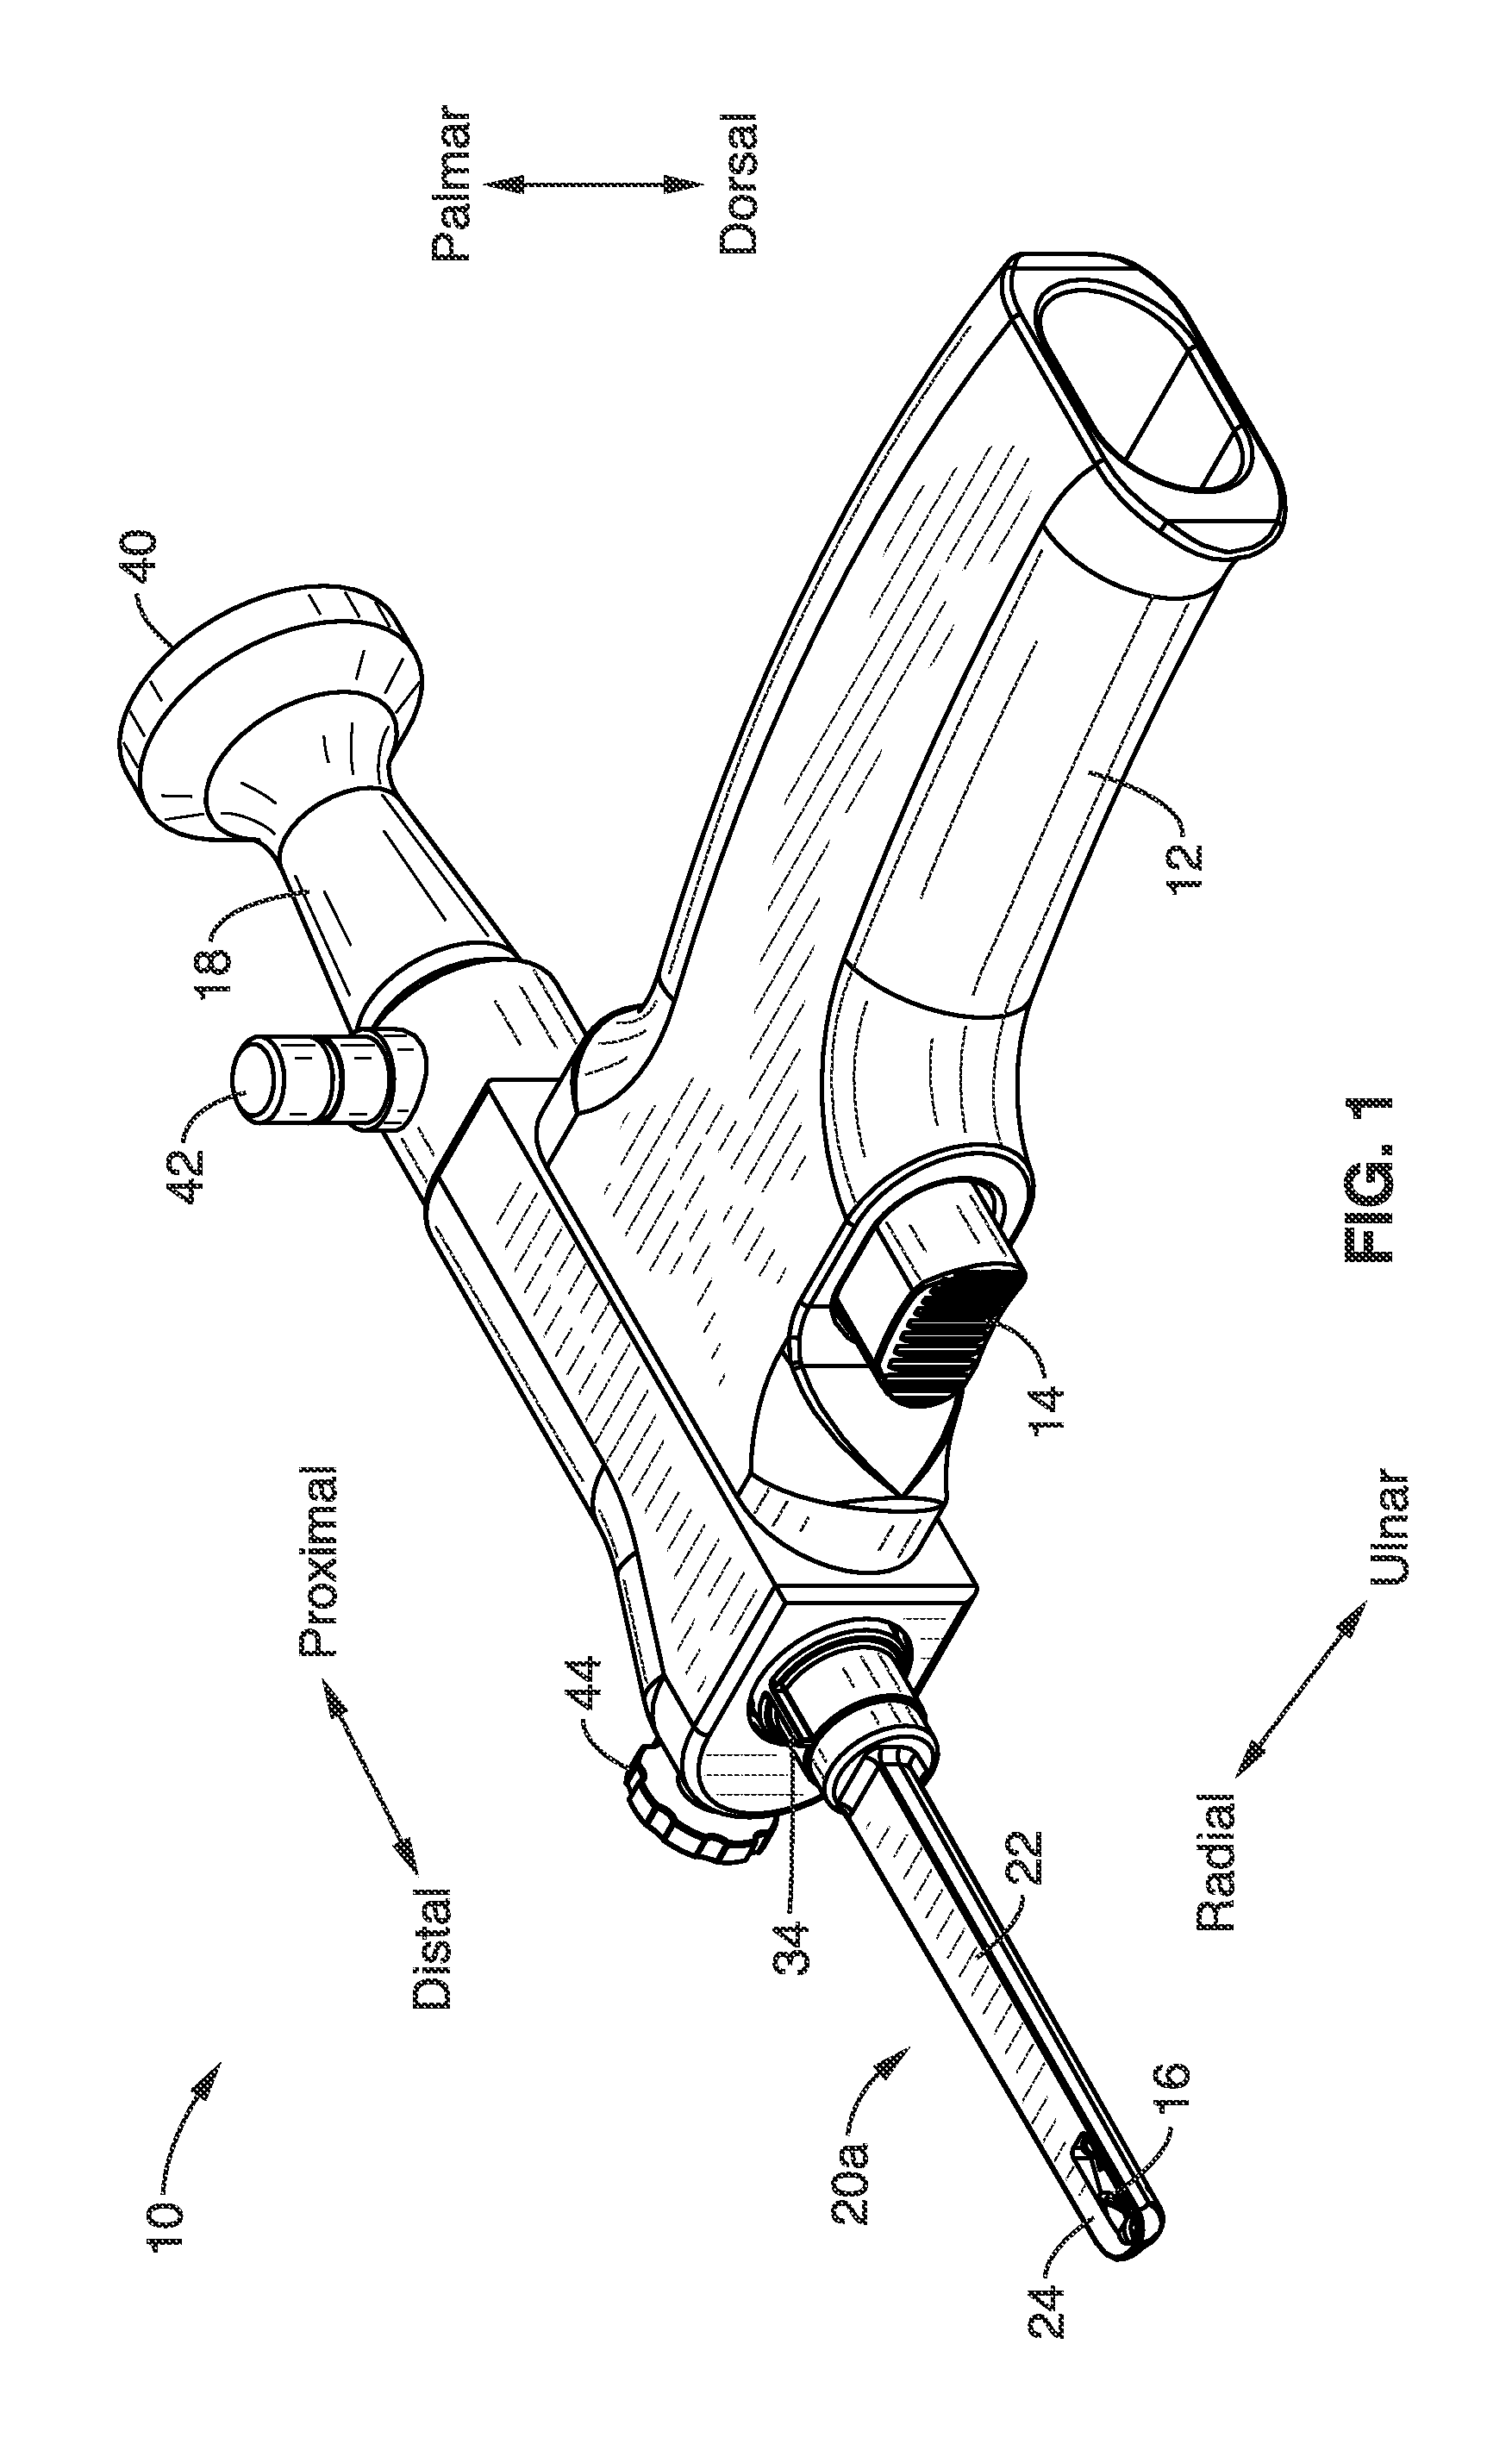 Method and apparatus for treatment of CTS using endoscopic carpal tunnel release